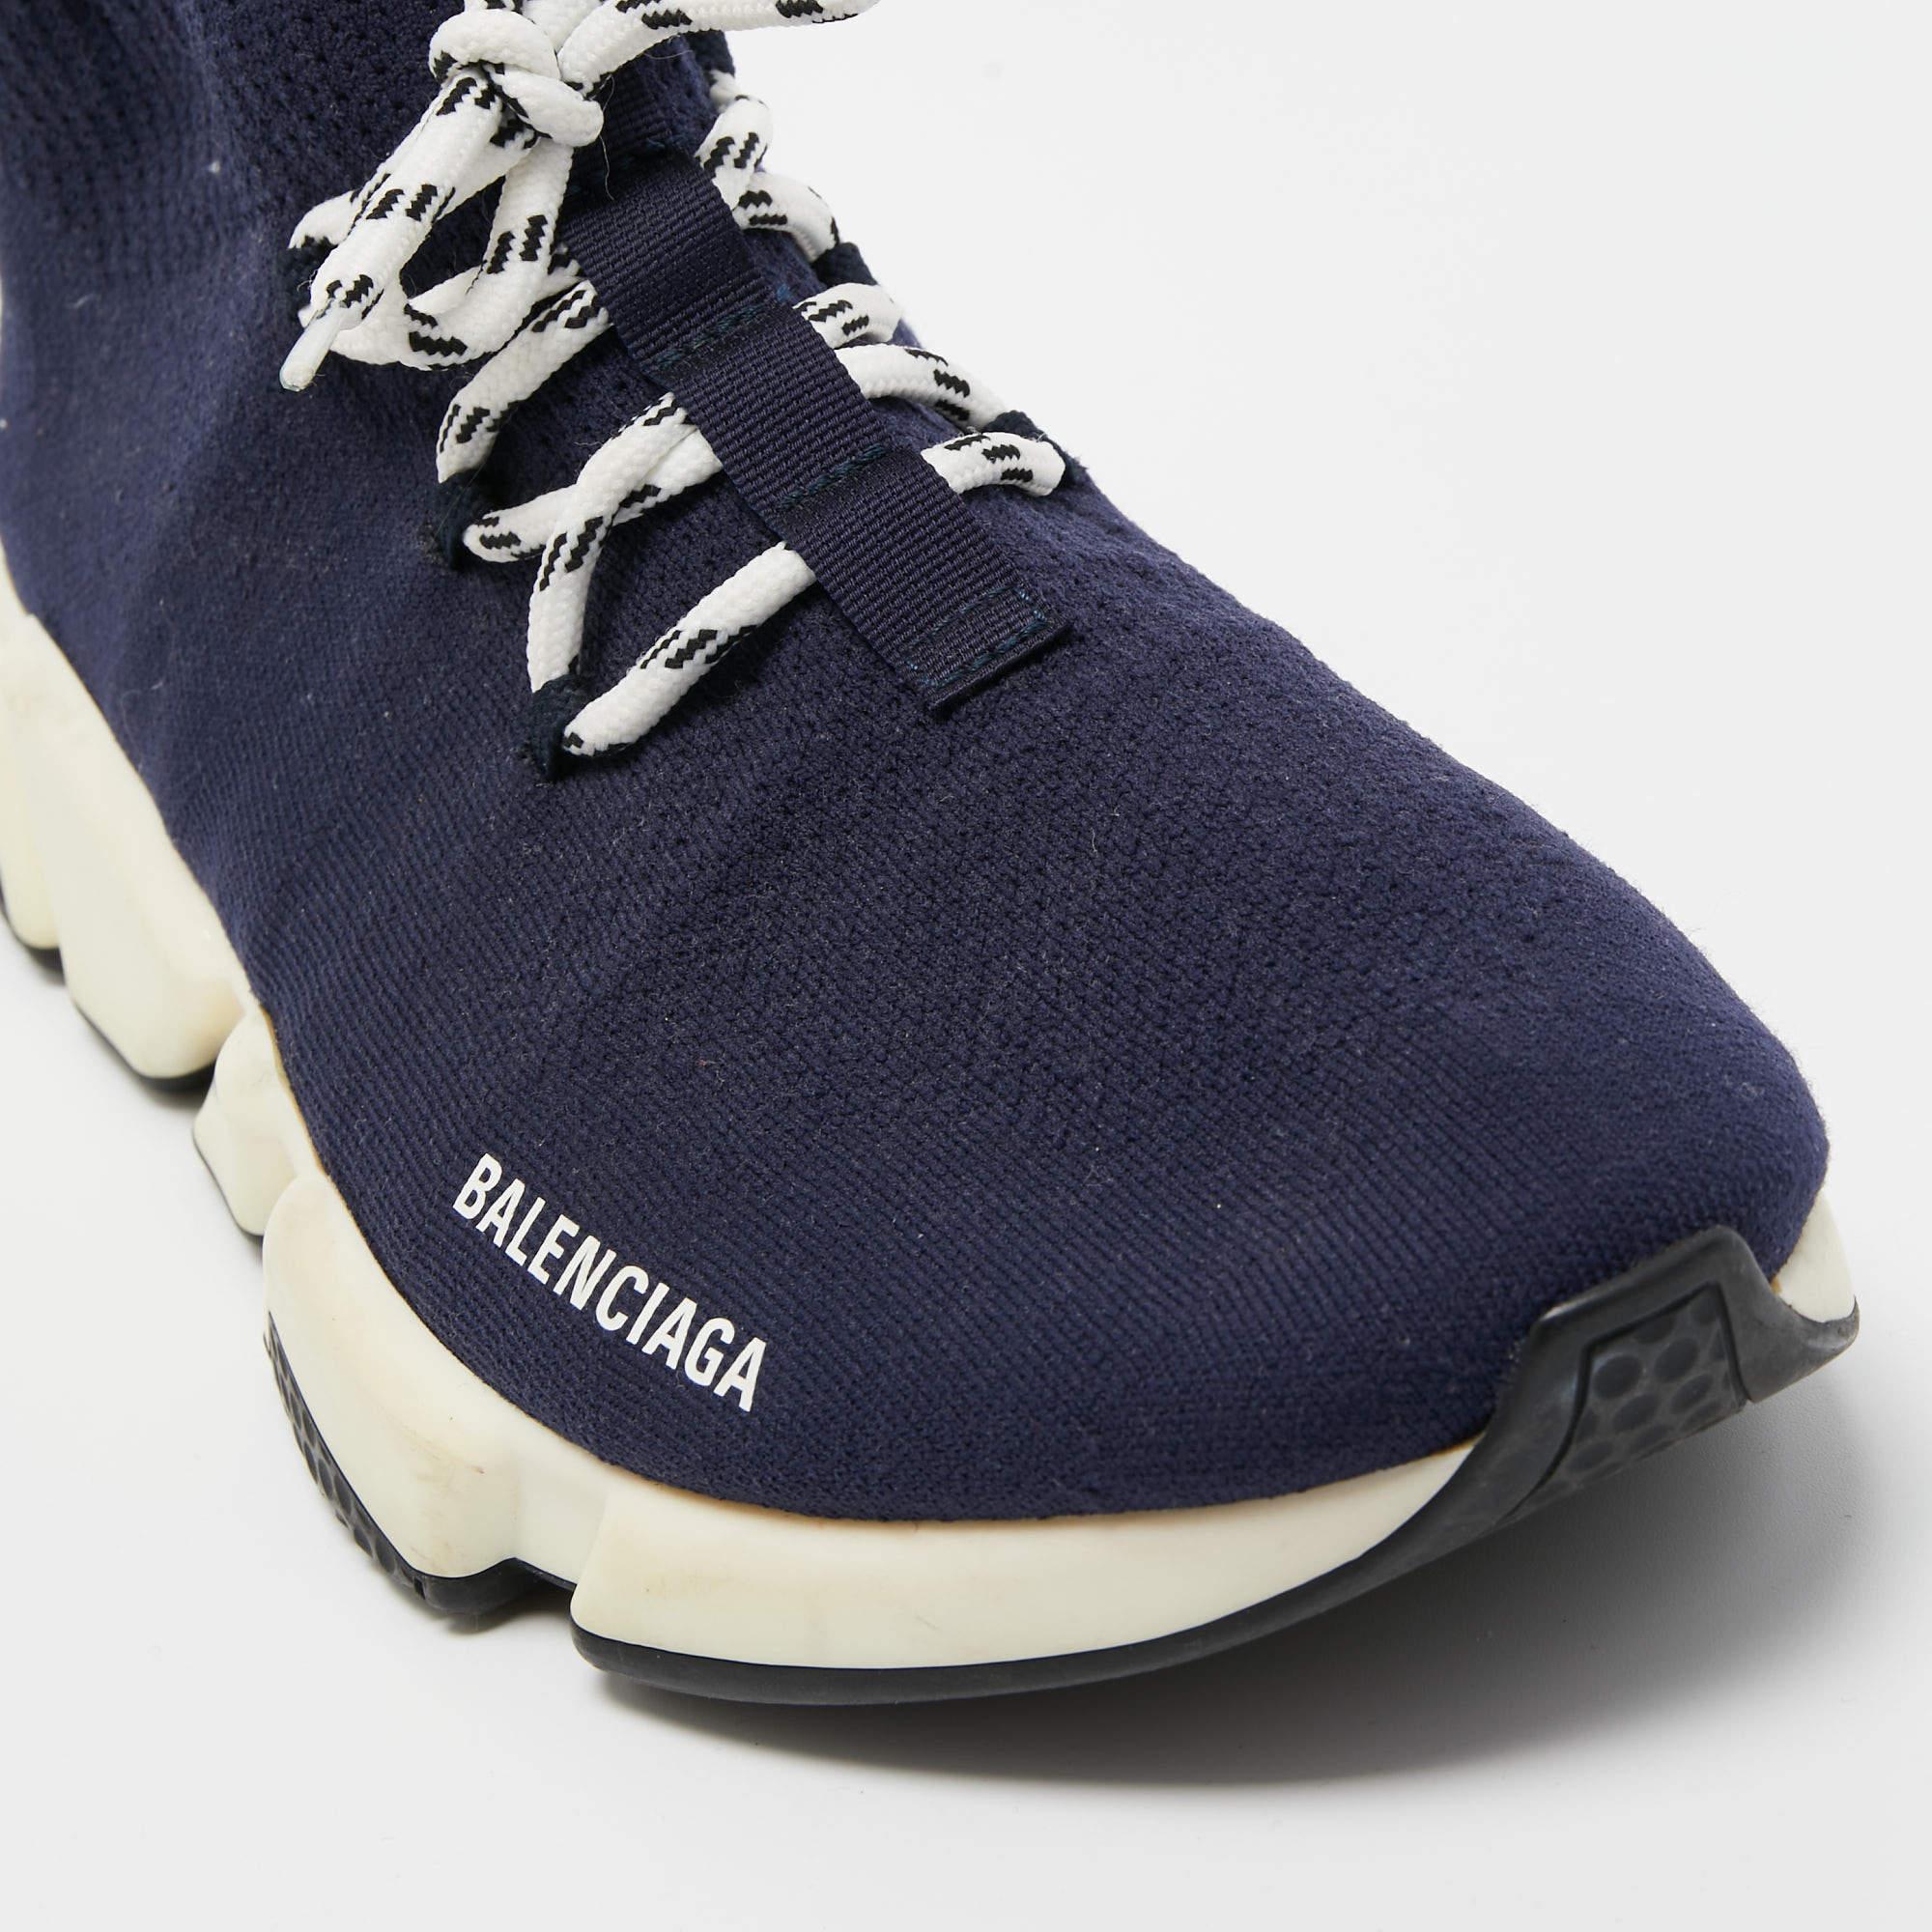 Balenciaga Navy Blue Knit Fabric Speed Trainer Sneakers Size 45 4